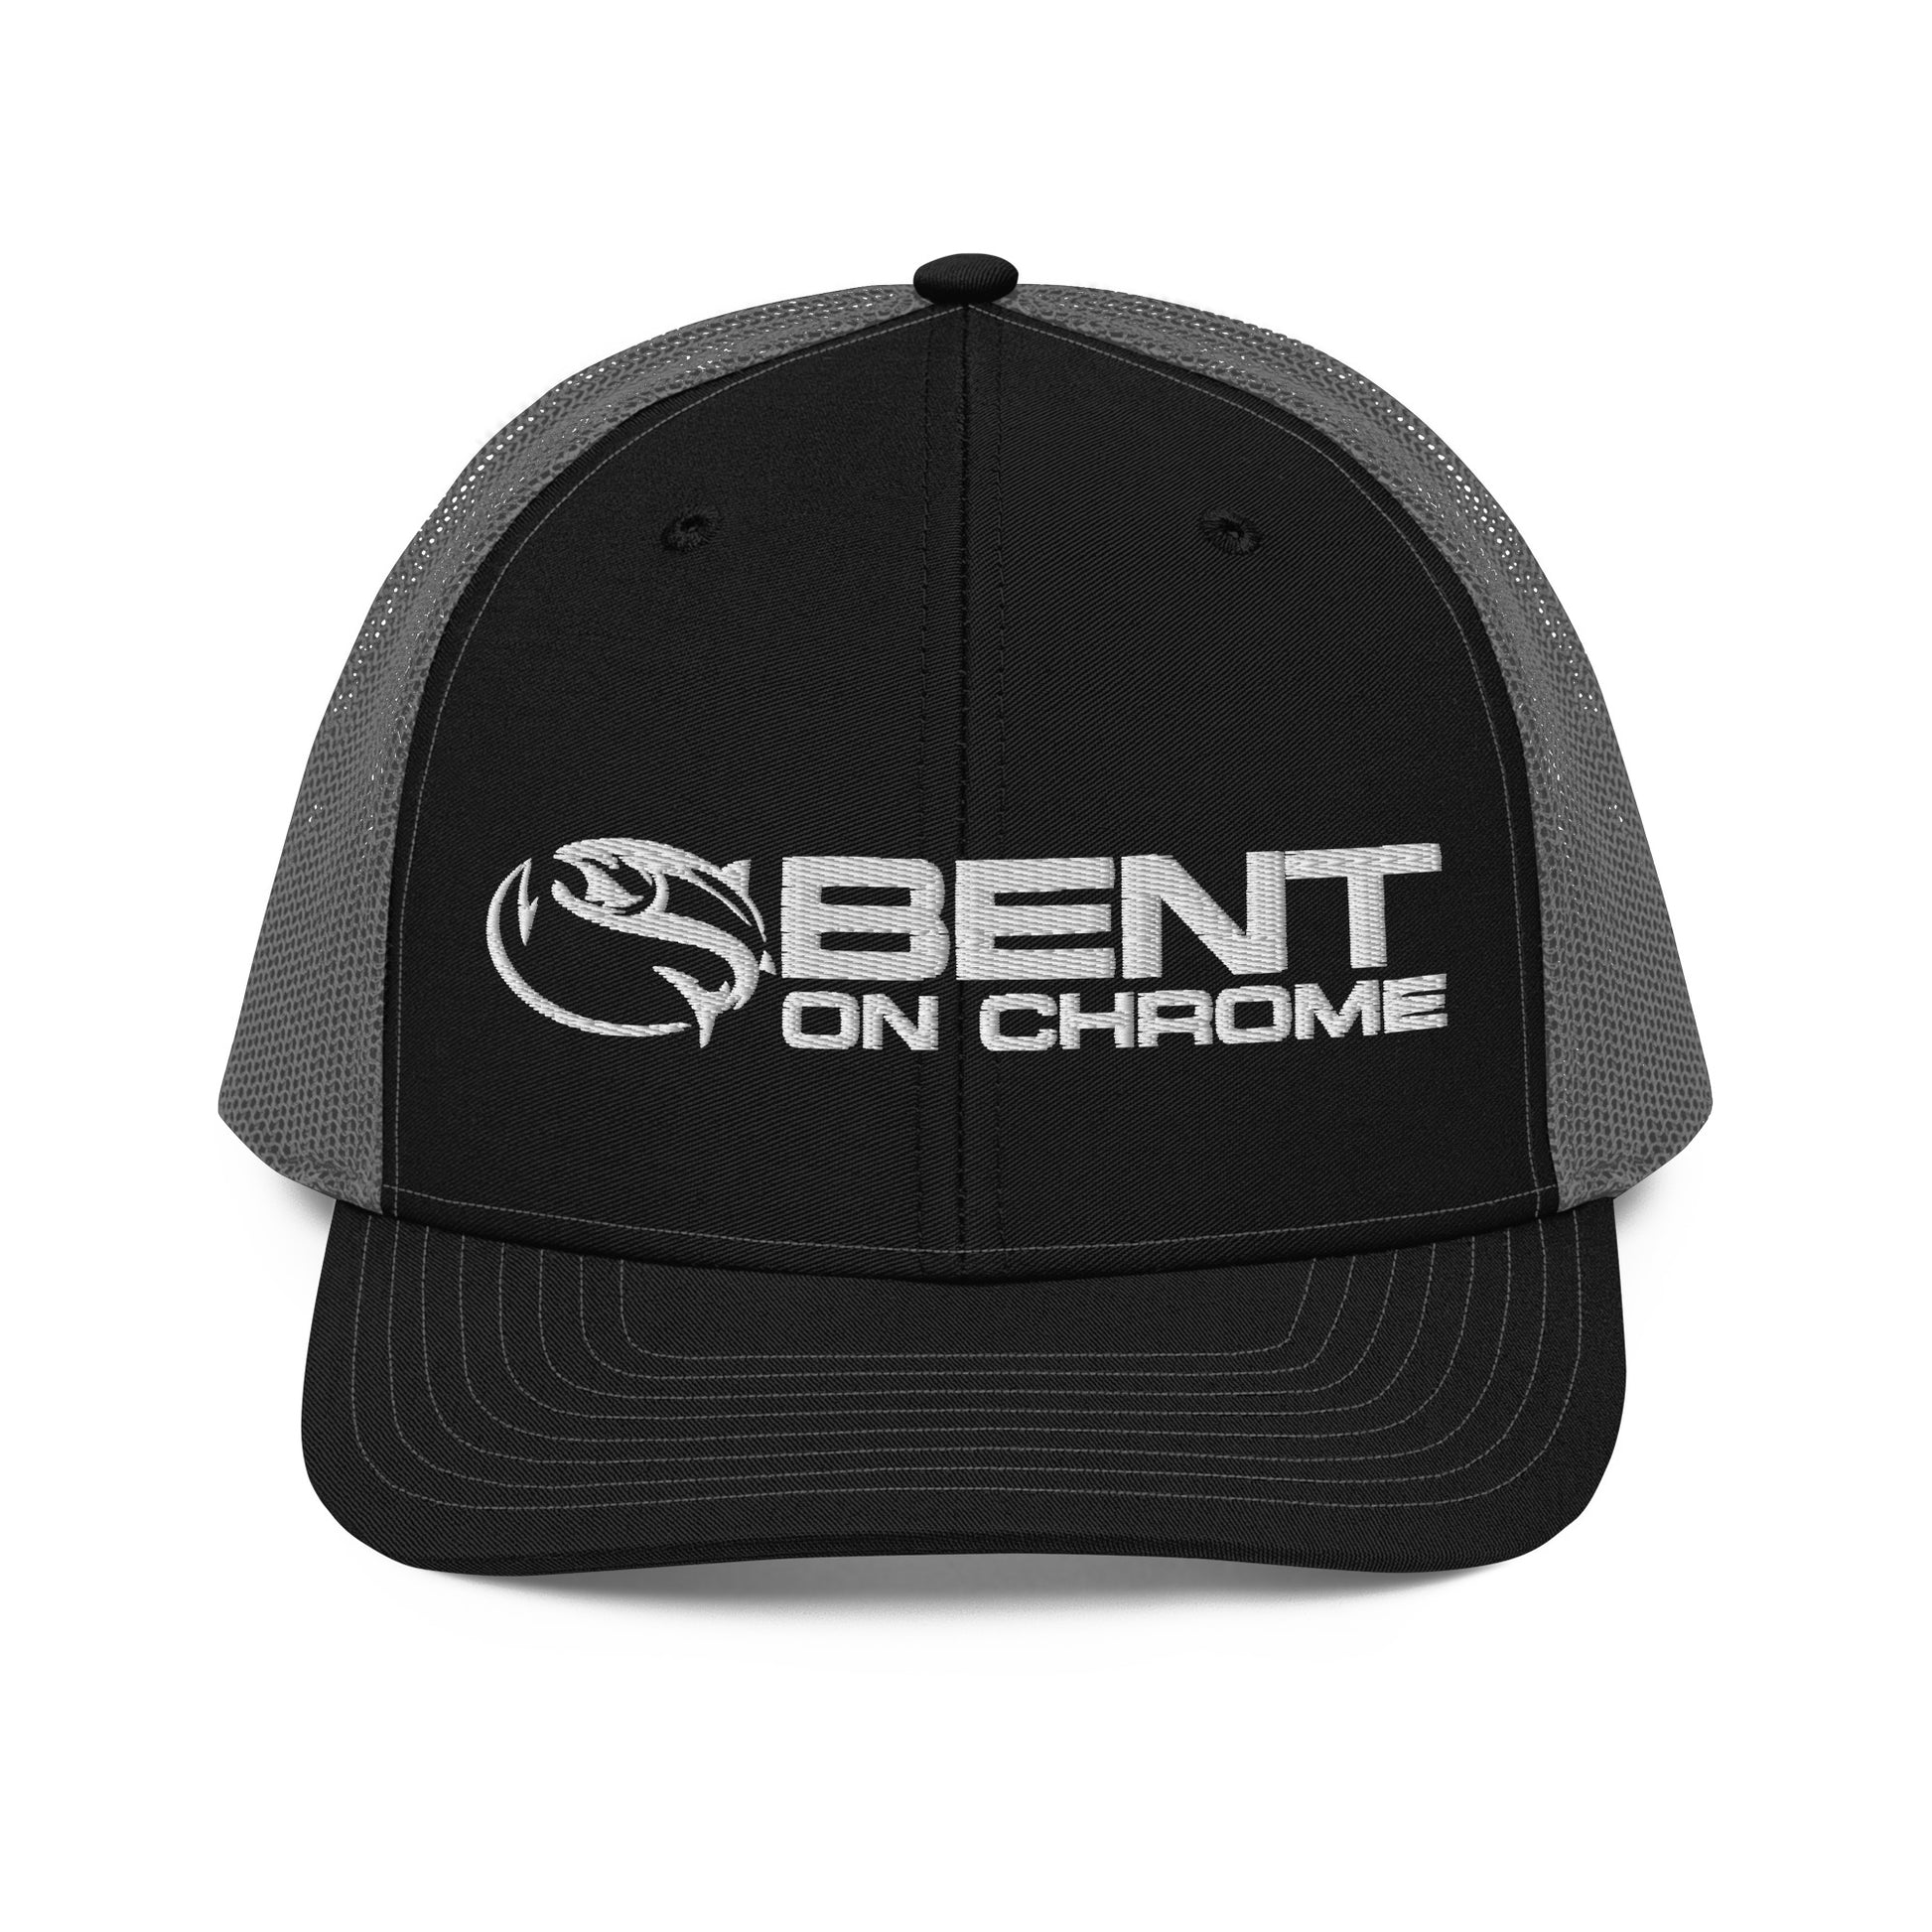 A black and gray Bent on Chrome - Richardson 112 Trucker Cap with Puffer Embroidery featuring the logo "bent on chrome" with a stylized wing design on the front panel. The cap has a mesh back, an adjustable snap